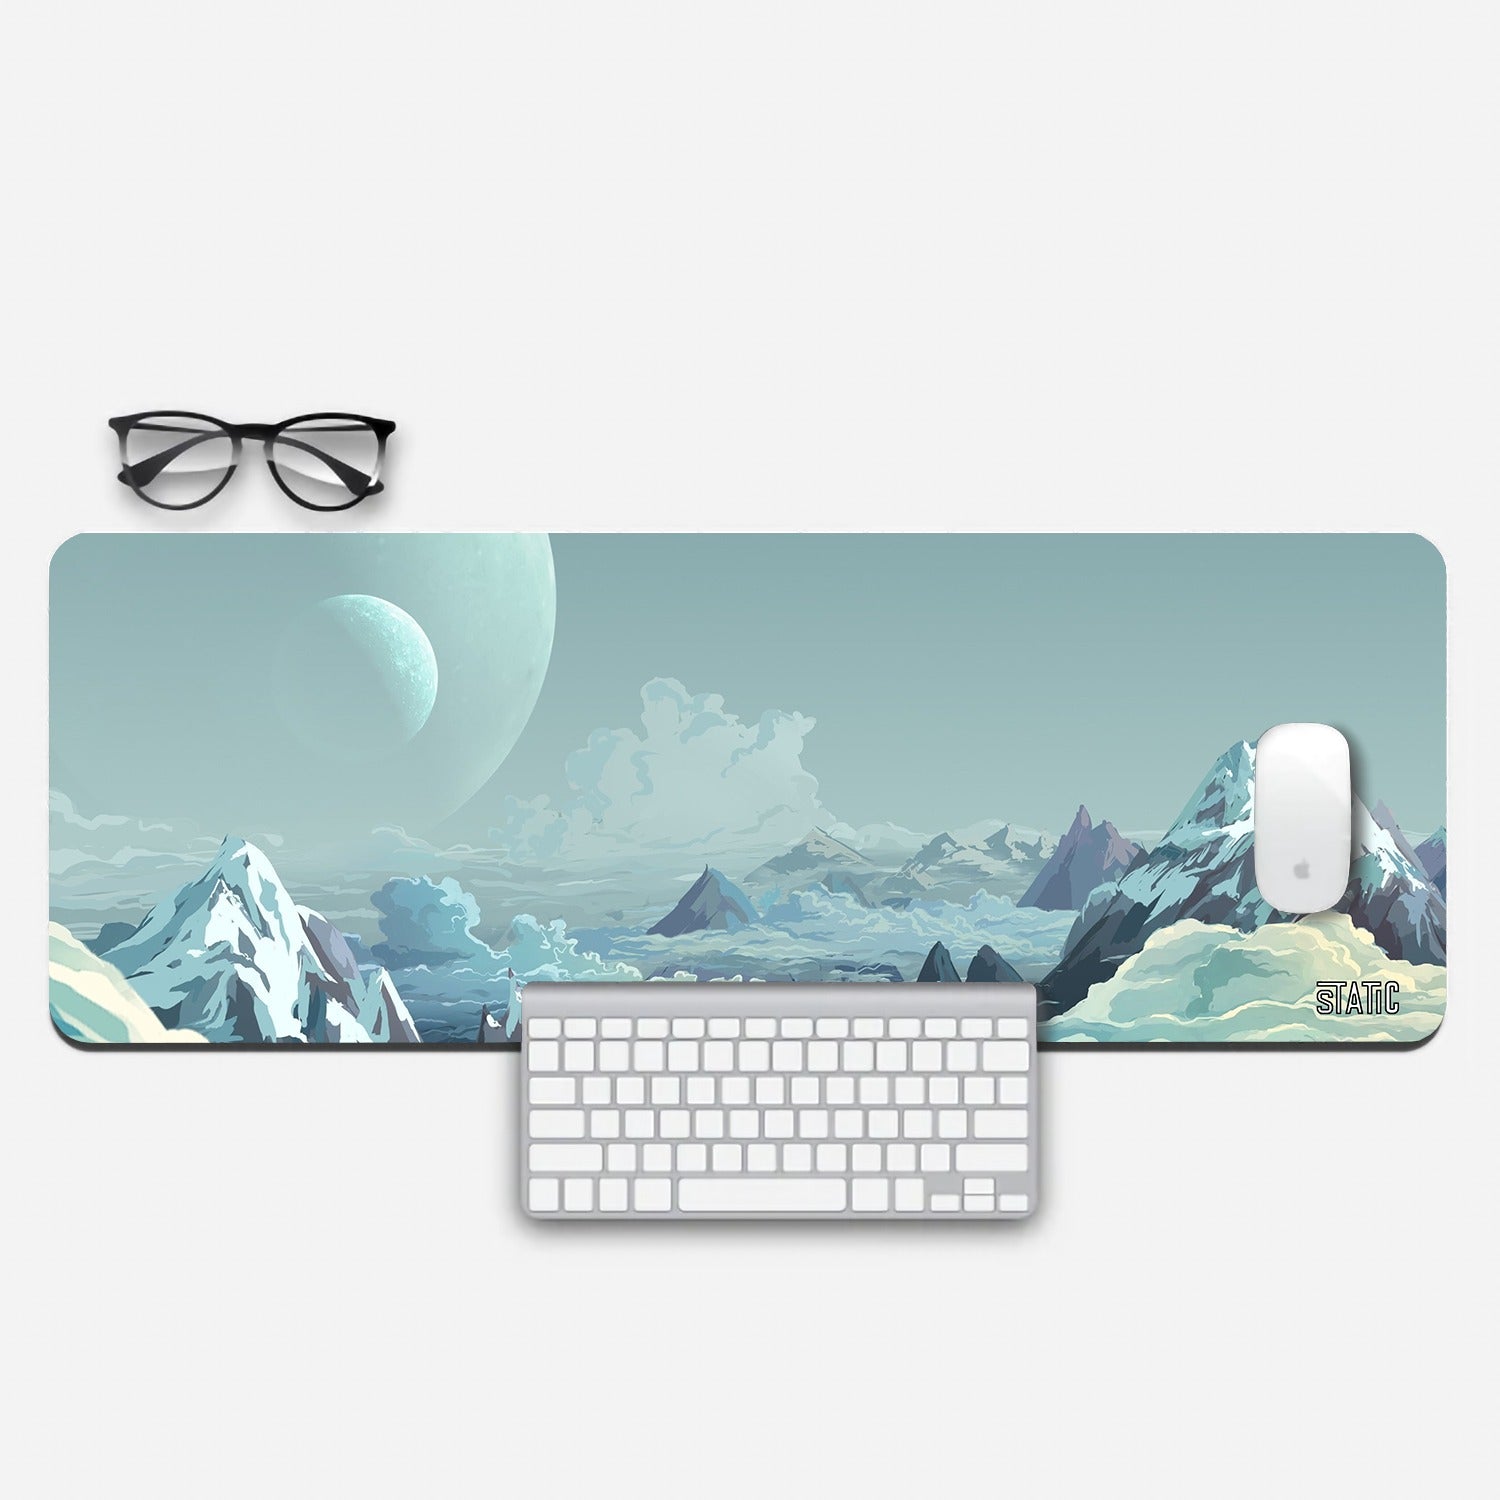 Elevate your gaming experience with our premium 800x300mm gaming pad. It's 3mm thick, providing a comfortable and supportive surface. Designed for gamers, it features skid-proof properties and a solid back grip for precise control. The stunning digital image of snow-clad mountains, taken from a summit, creates an immersive atmosphere. Printed with high-quality sublimation EPSON inks, this pad offers a fade-proof guarantee. Bring the mountains to your gaming setup – order now for a unique gaming adventure!